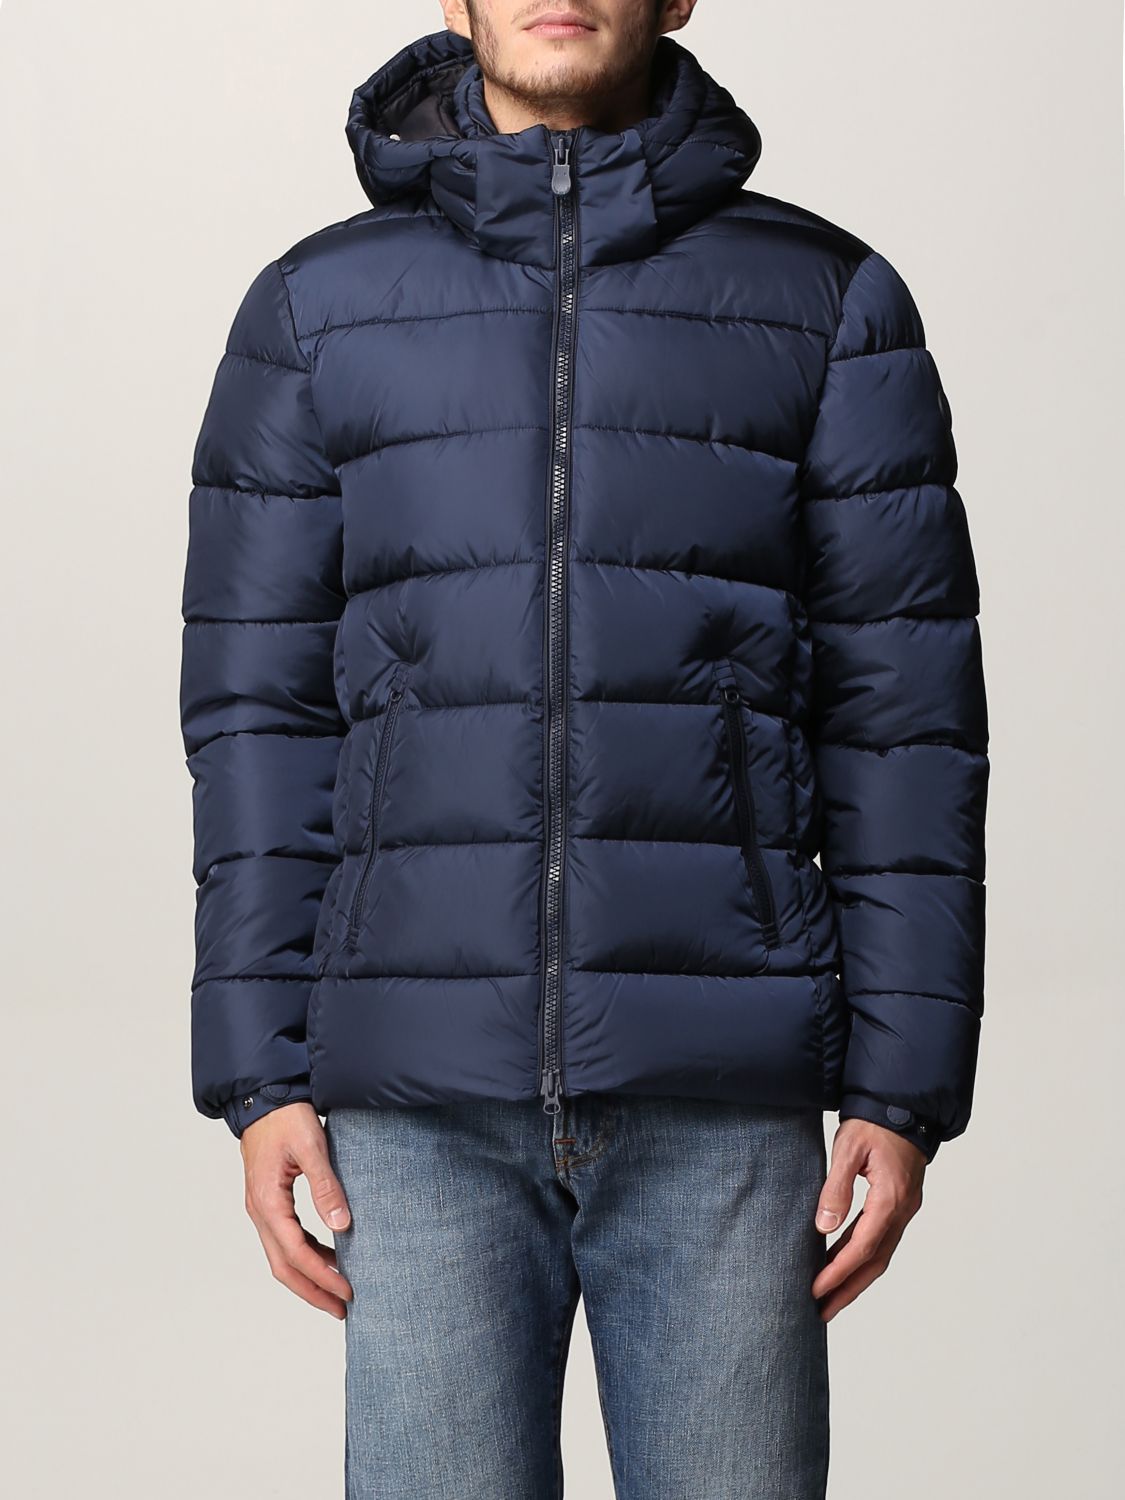 Jacket Save The Duck: Save The Duck jacket for man navy 1